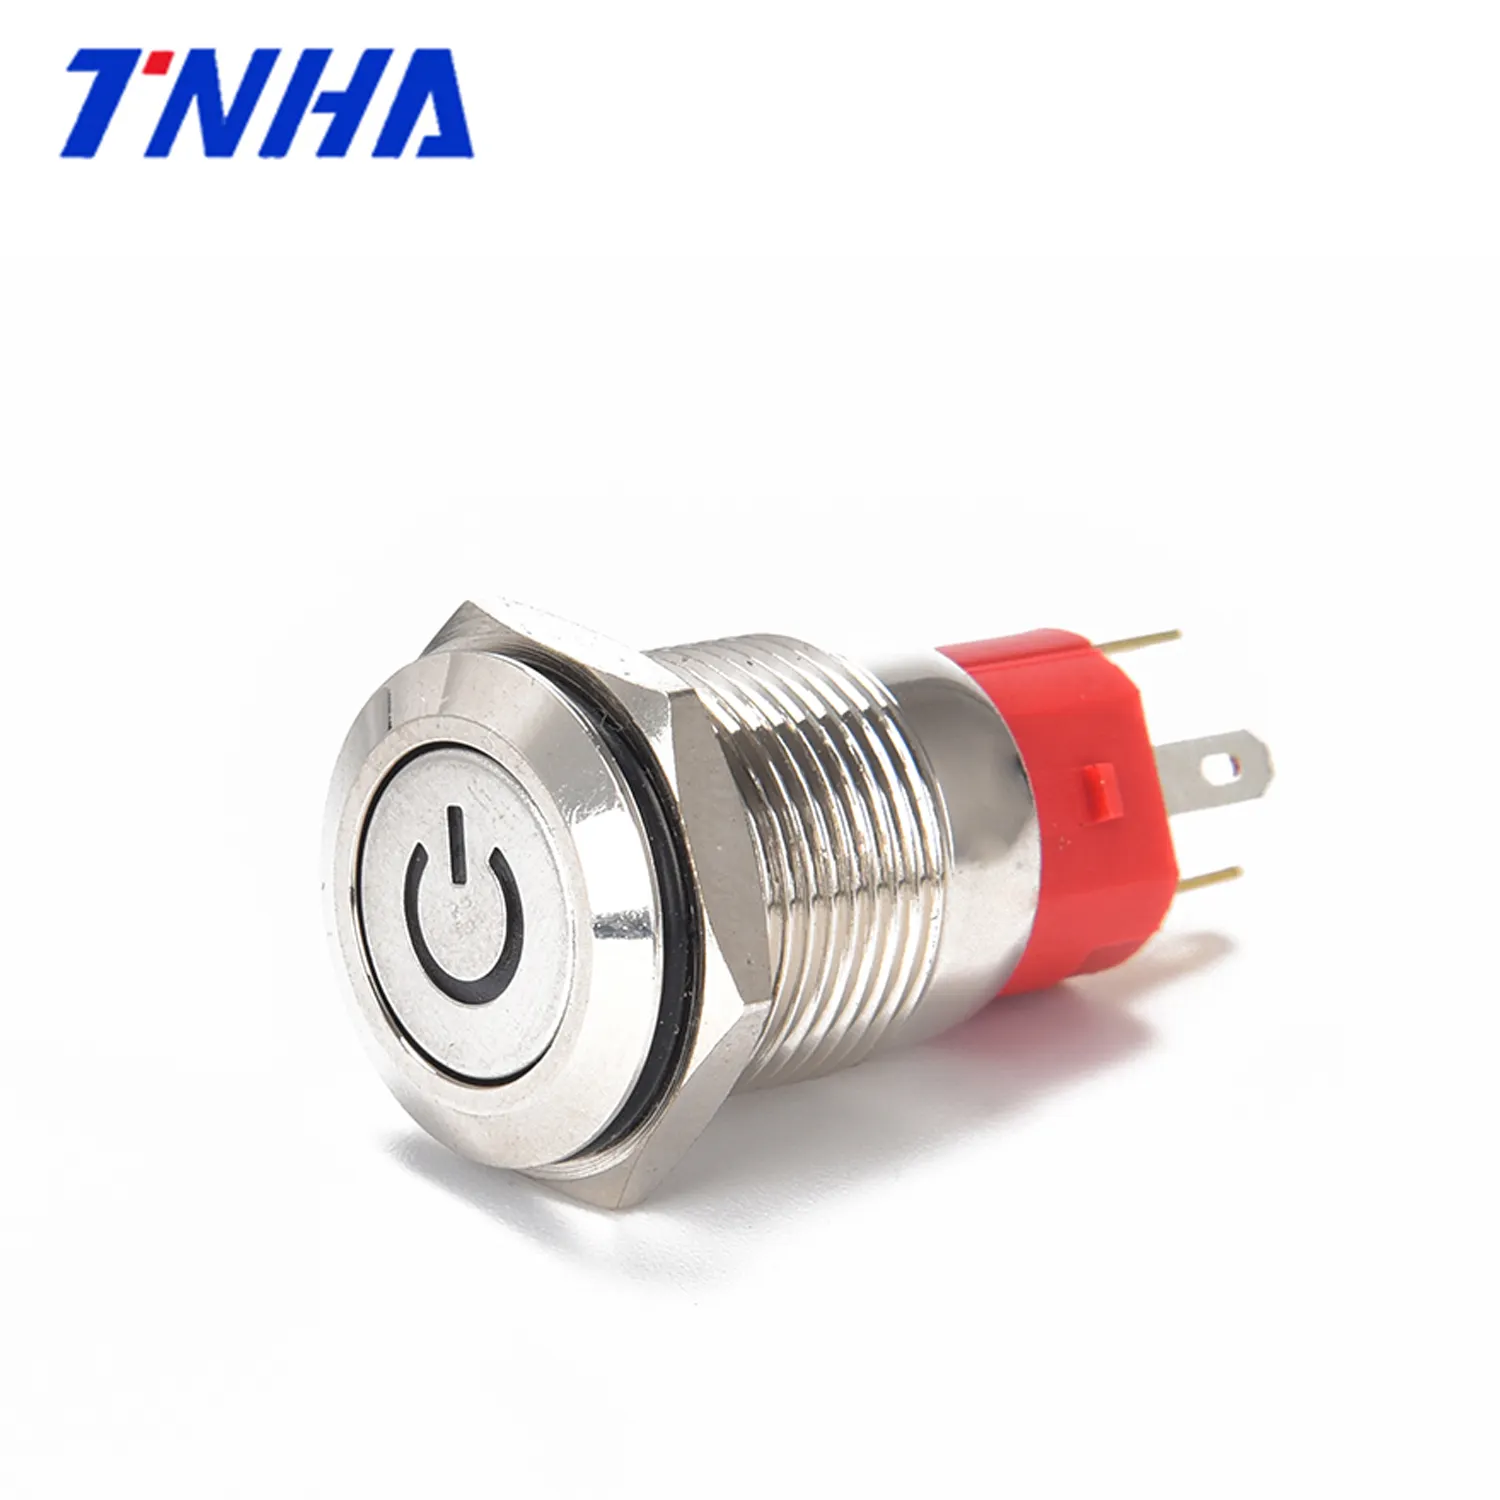 TH16A-P11 AC 220 volt IP67 16mm waterproof metal push button pushbutton Customizable plastic on off switch with led indicator